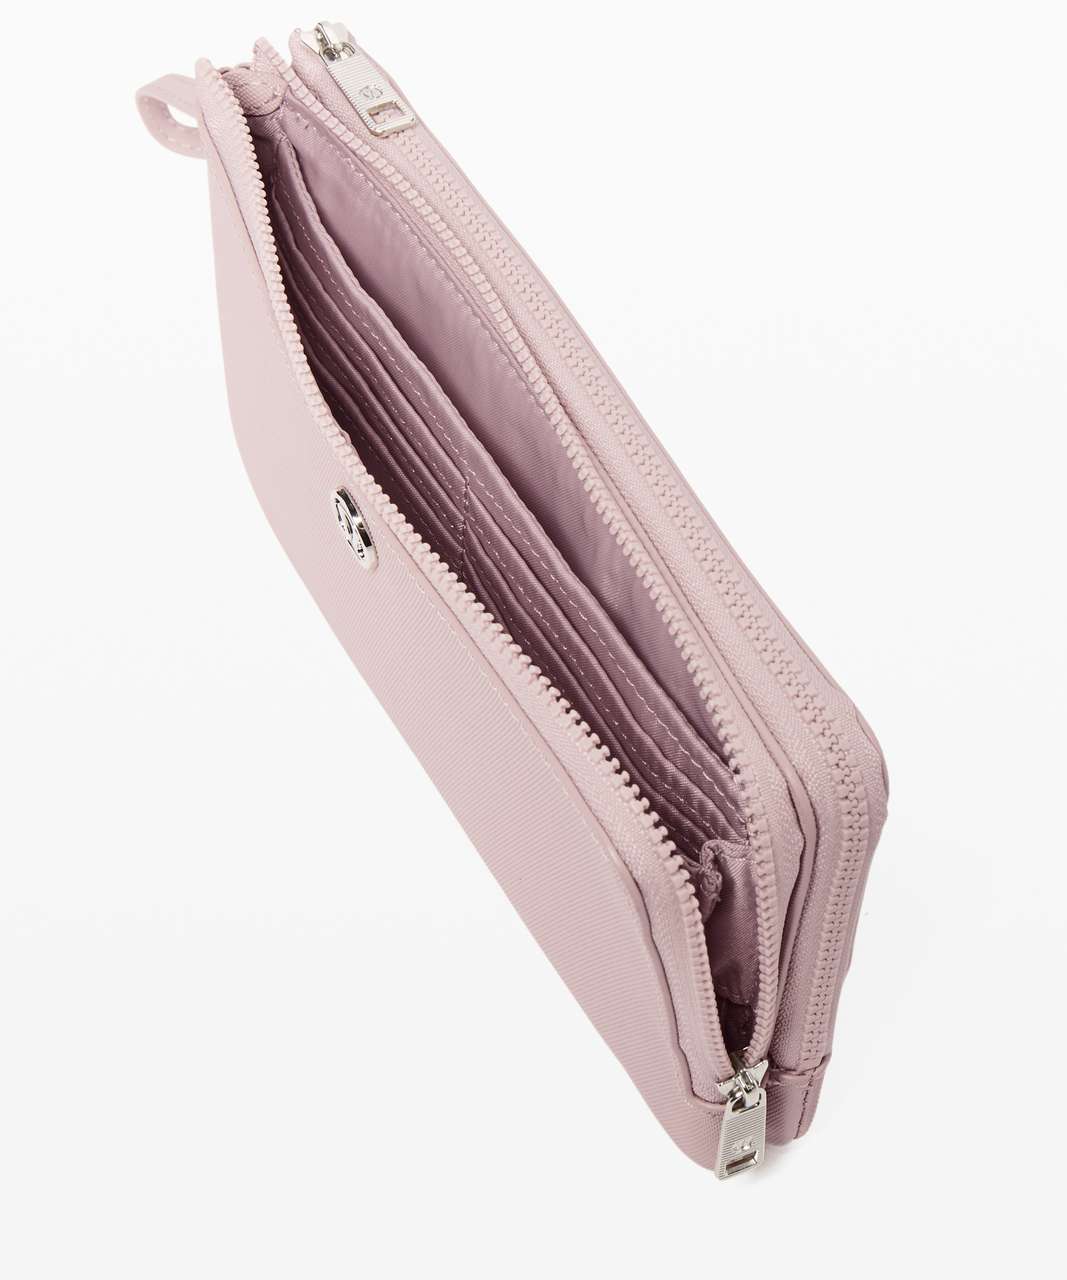 Lululemon Double Up Pouch - Muse